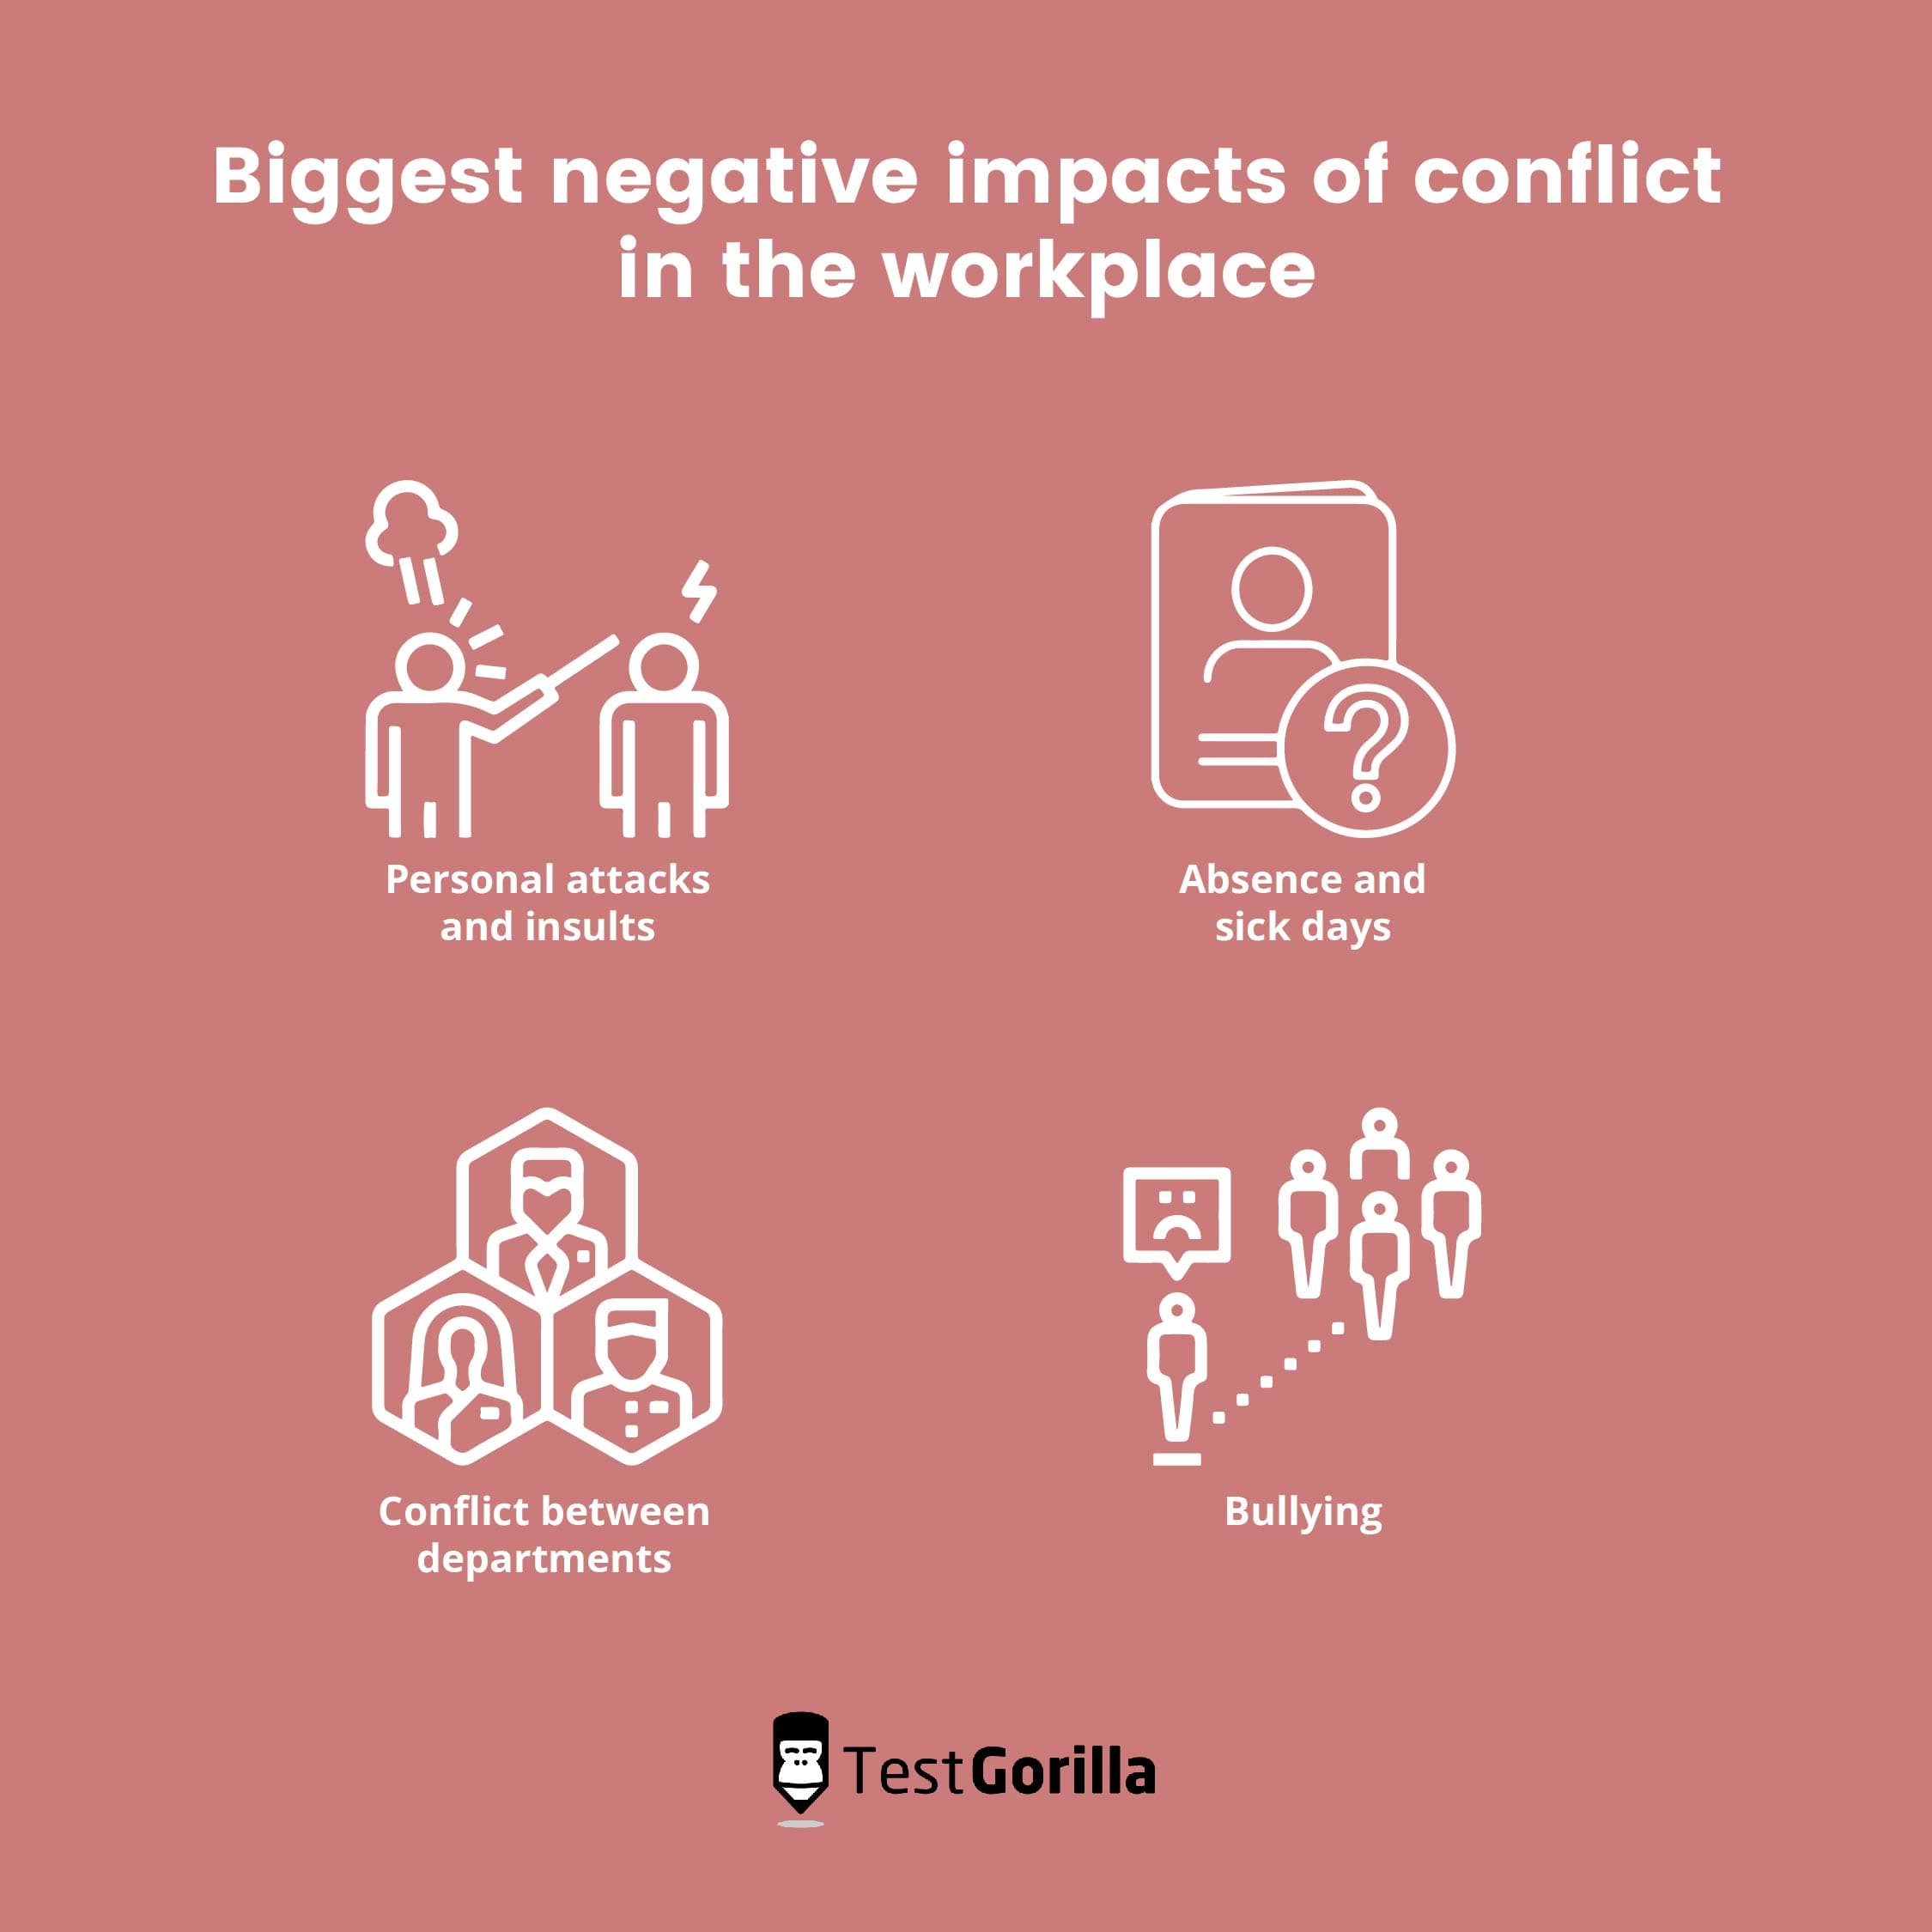 biggest negative impacts of conflict in the workplace: personal attacks and insults, absence and sick days, conflict between departments, bullying